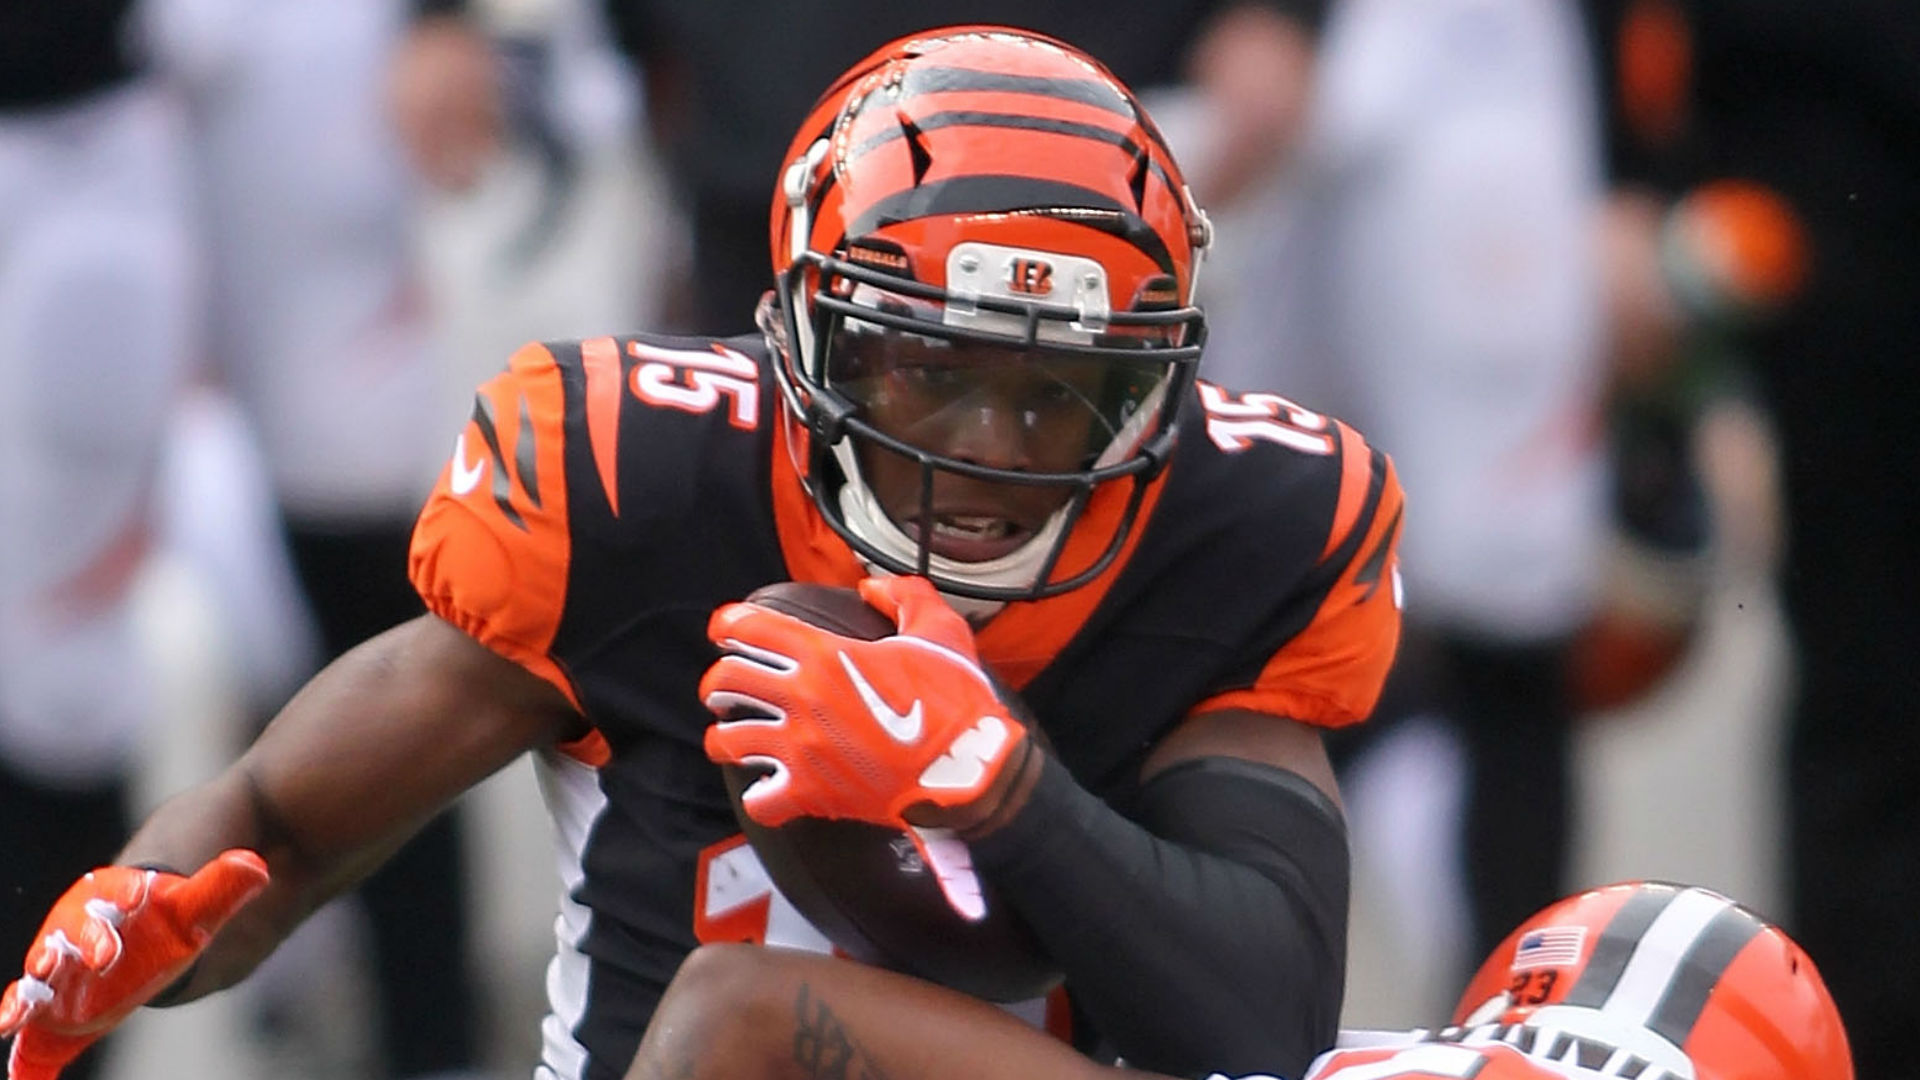 Bengals' John Ross to reportedly miss multiple games with shoulder injury, derailing breakout season